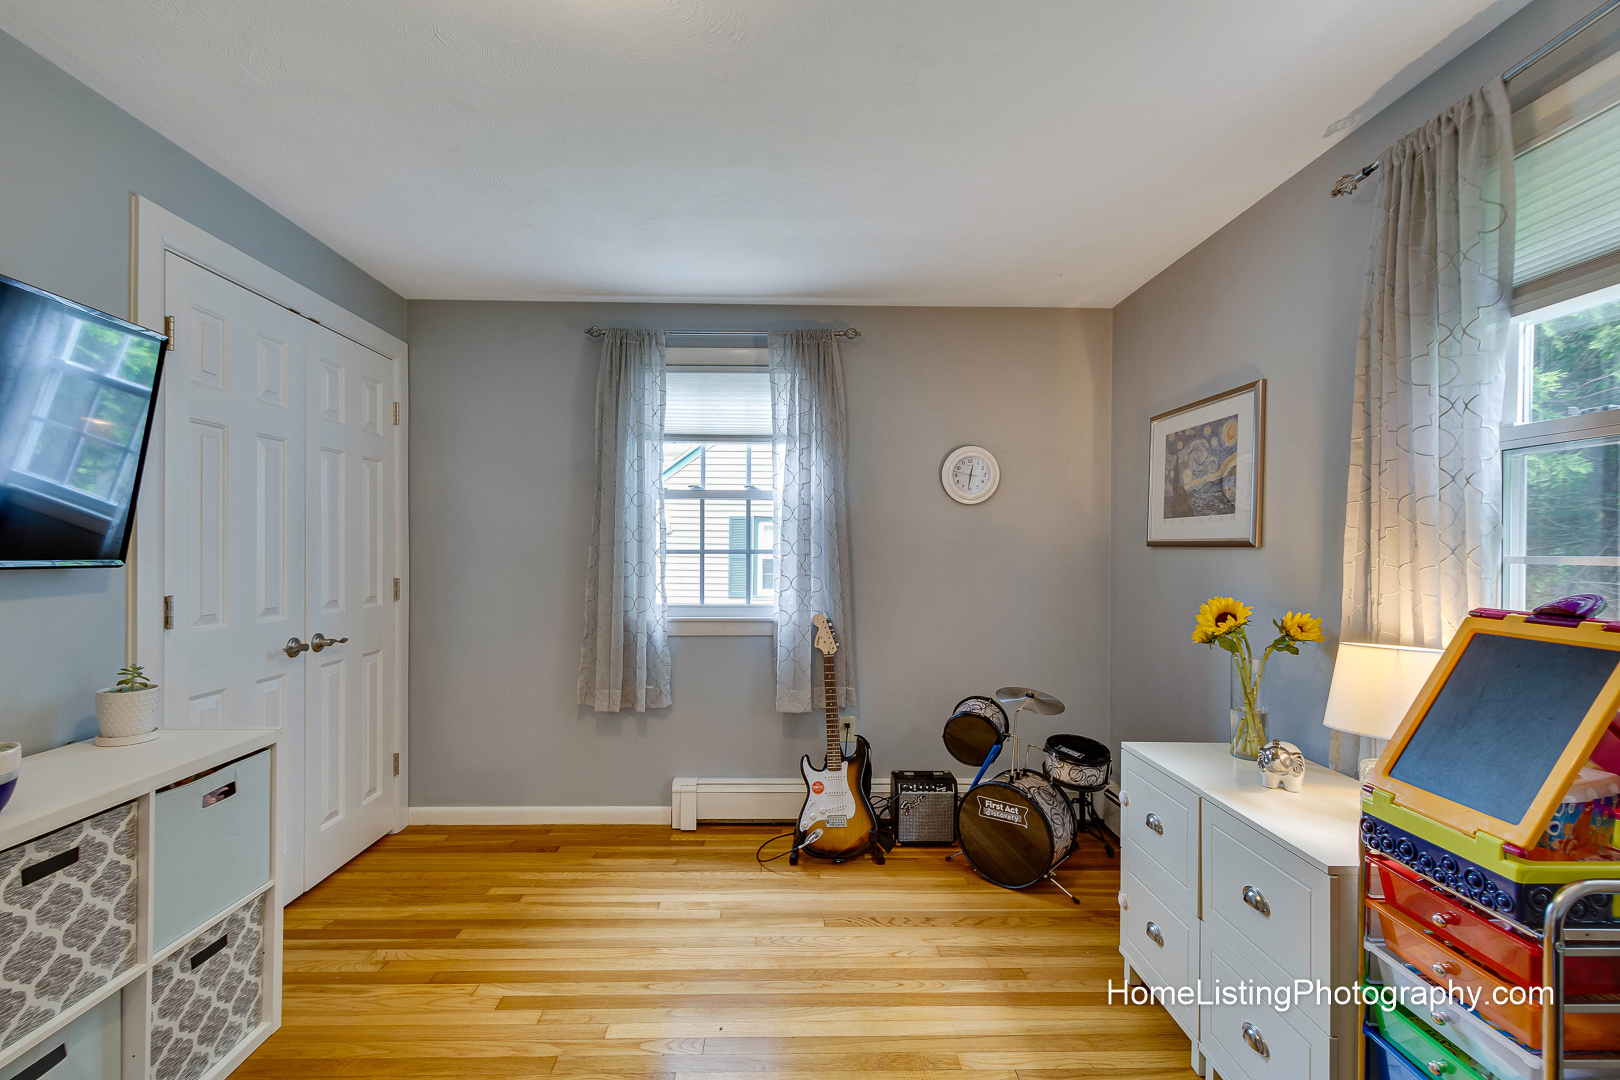 Thomas Adach - Lowell MA professional real estate photographer - 508-655-2225 Home Listing Photography